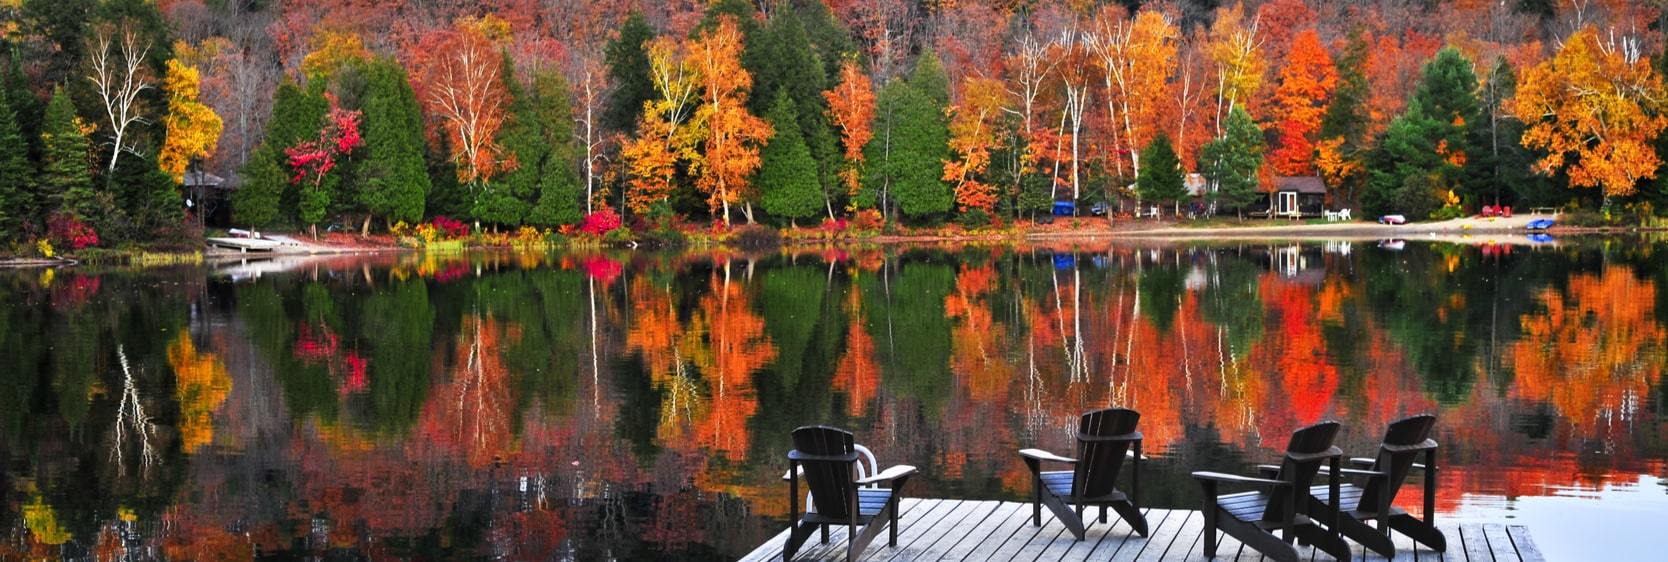 Chairs on a dock overlooking stunning Muskoka Lakes and vibrant forestry near Bala